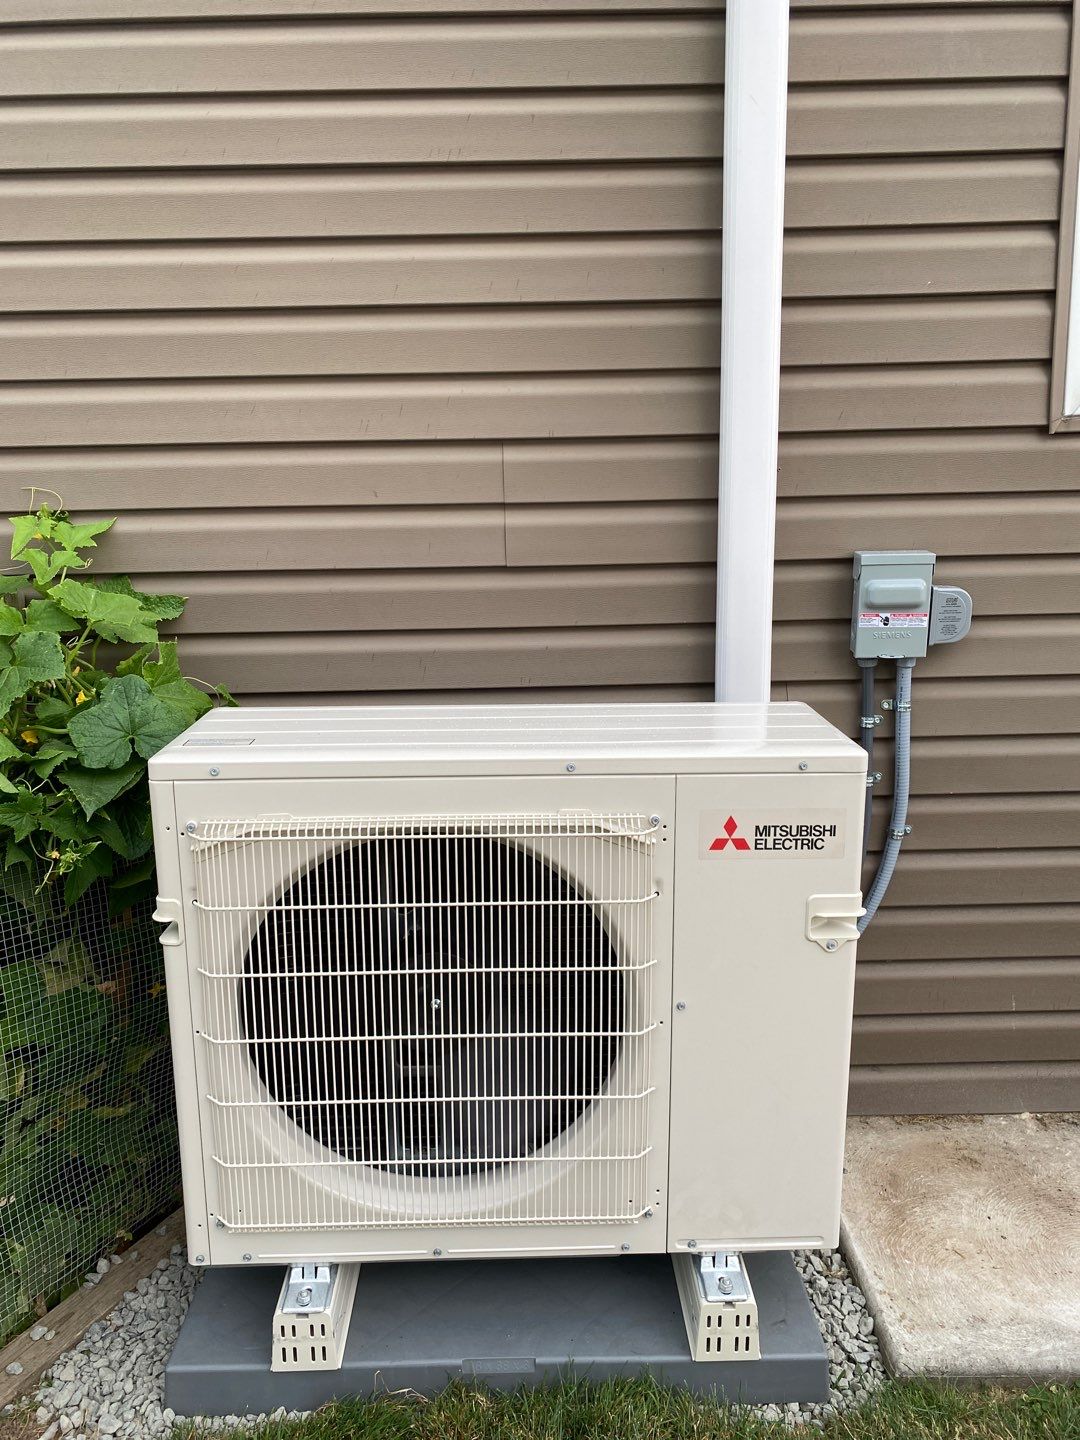 Levittown Homeowners Finally Upgrade from Window AC Units to a Mitsubishi Electric Ductless System 